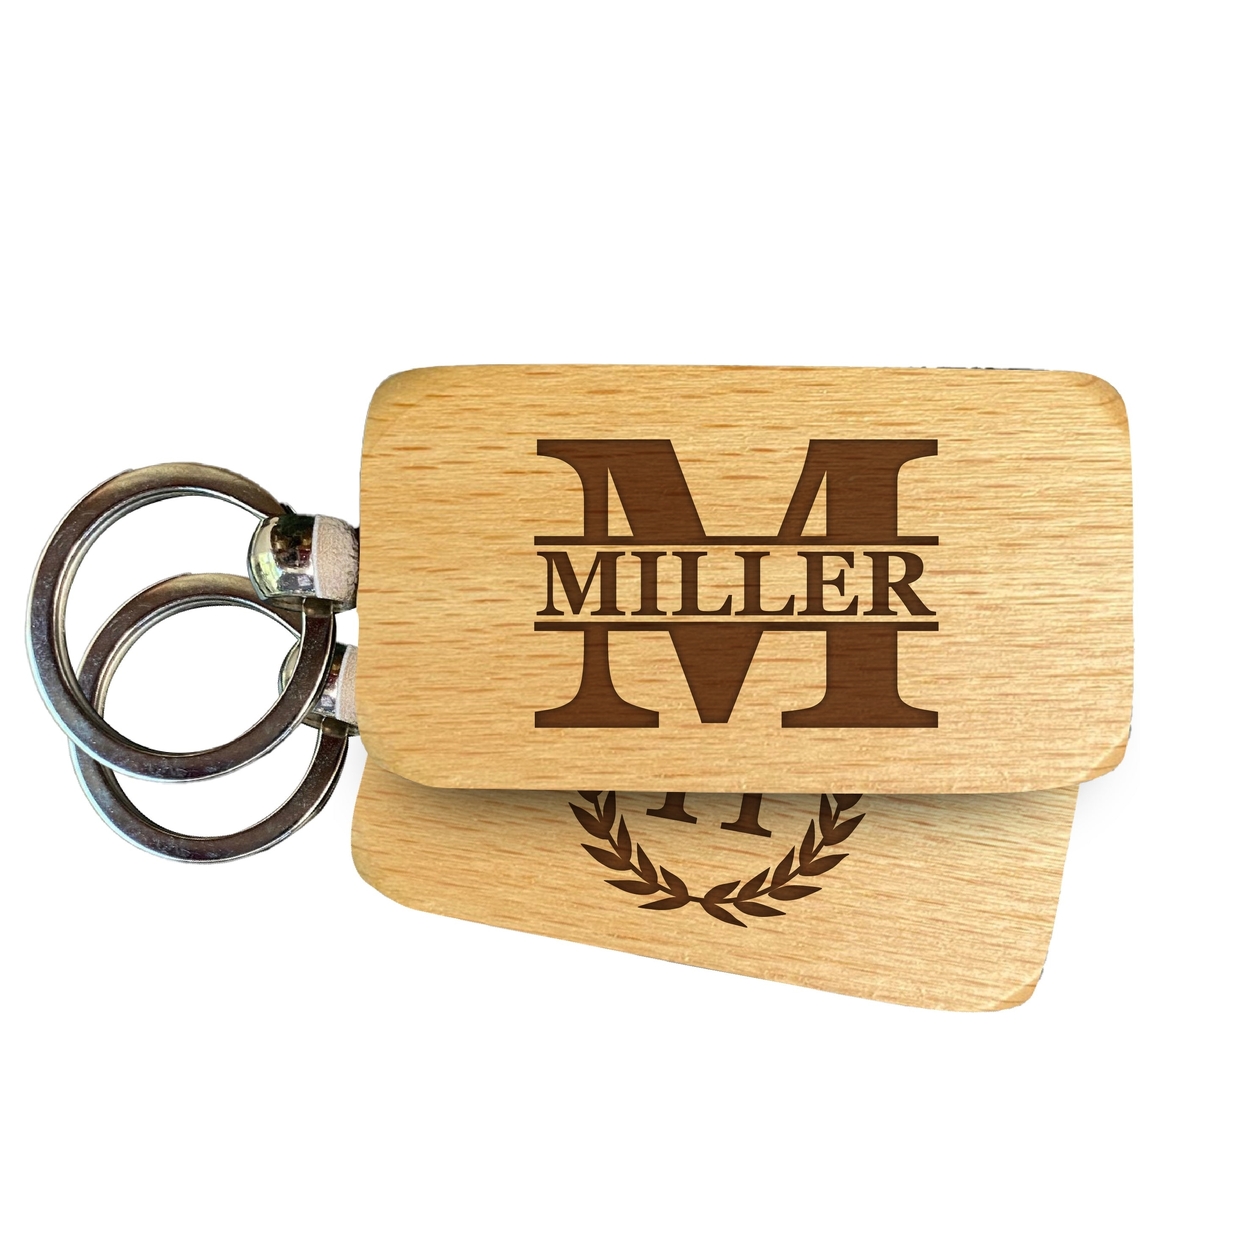 Custom Engraved Monogram Wooden Keychain Personalized With Monogram And Name 2.5x1 Inch Etched Wood Key Chain